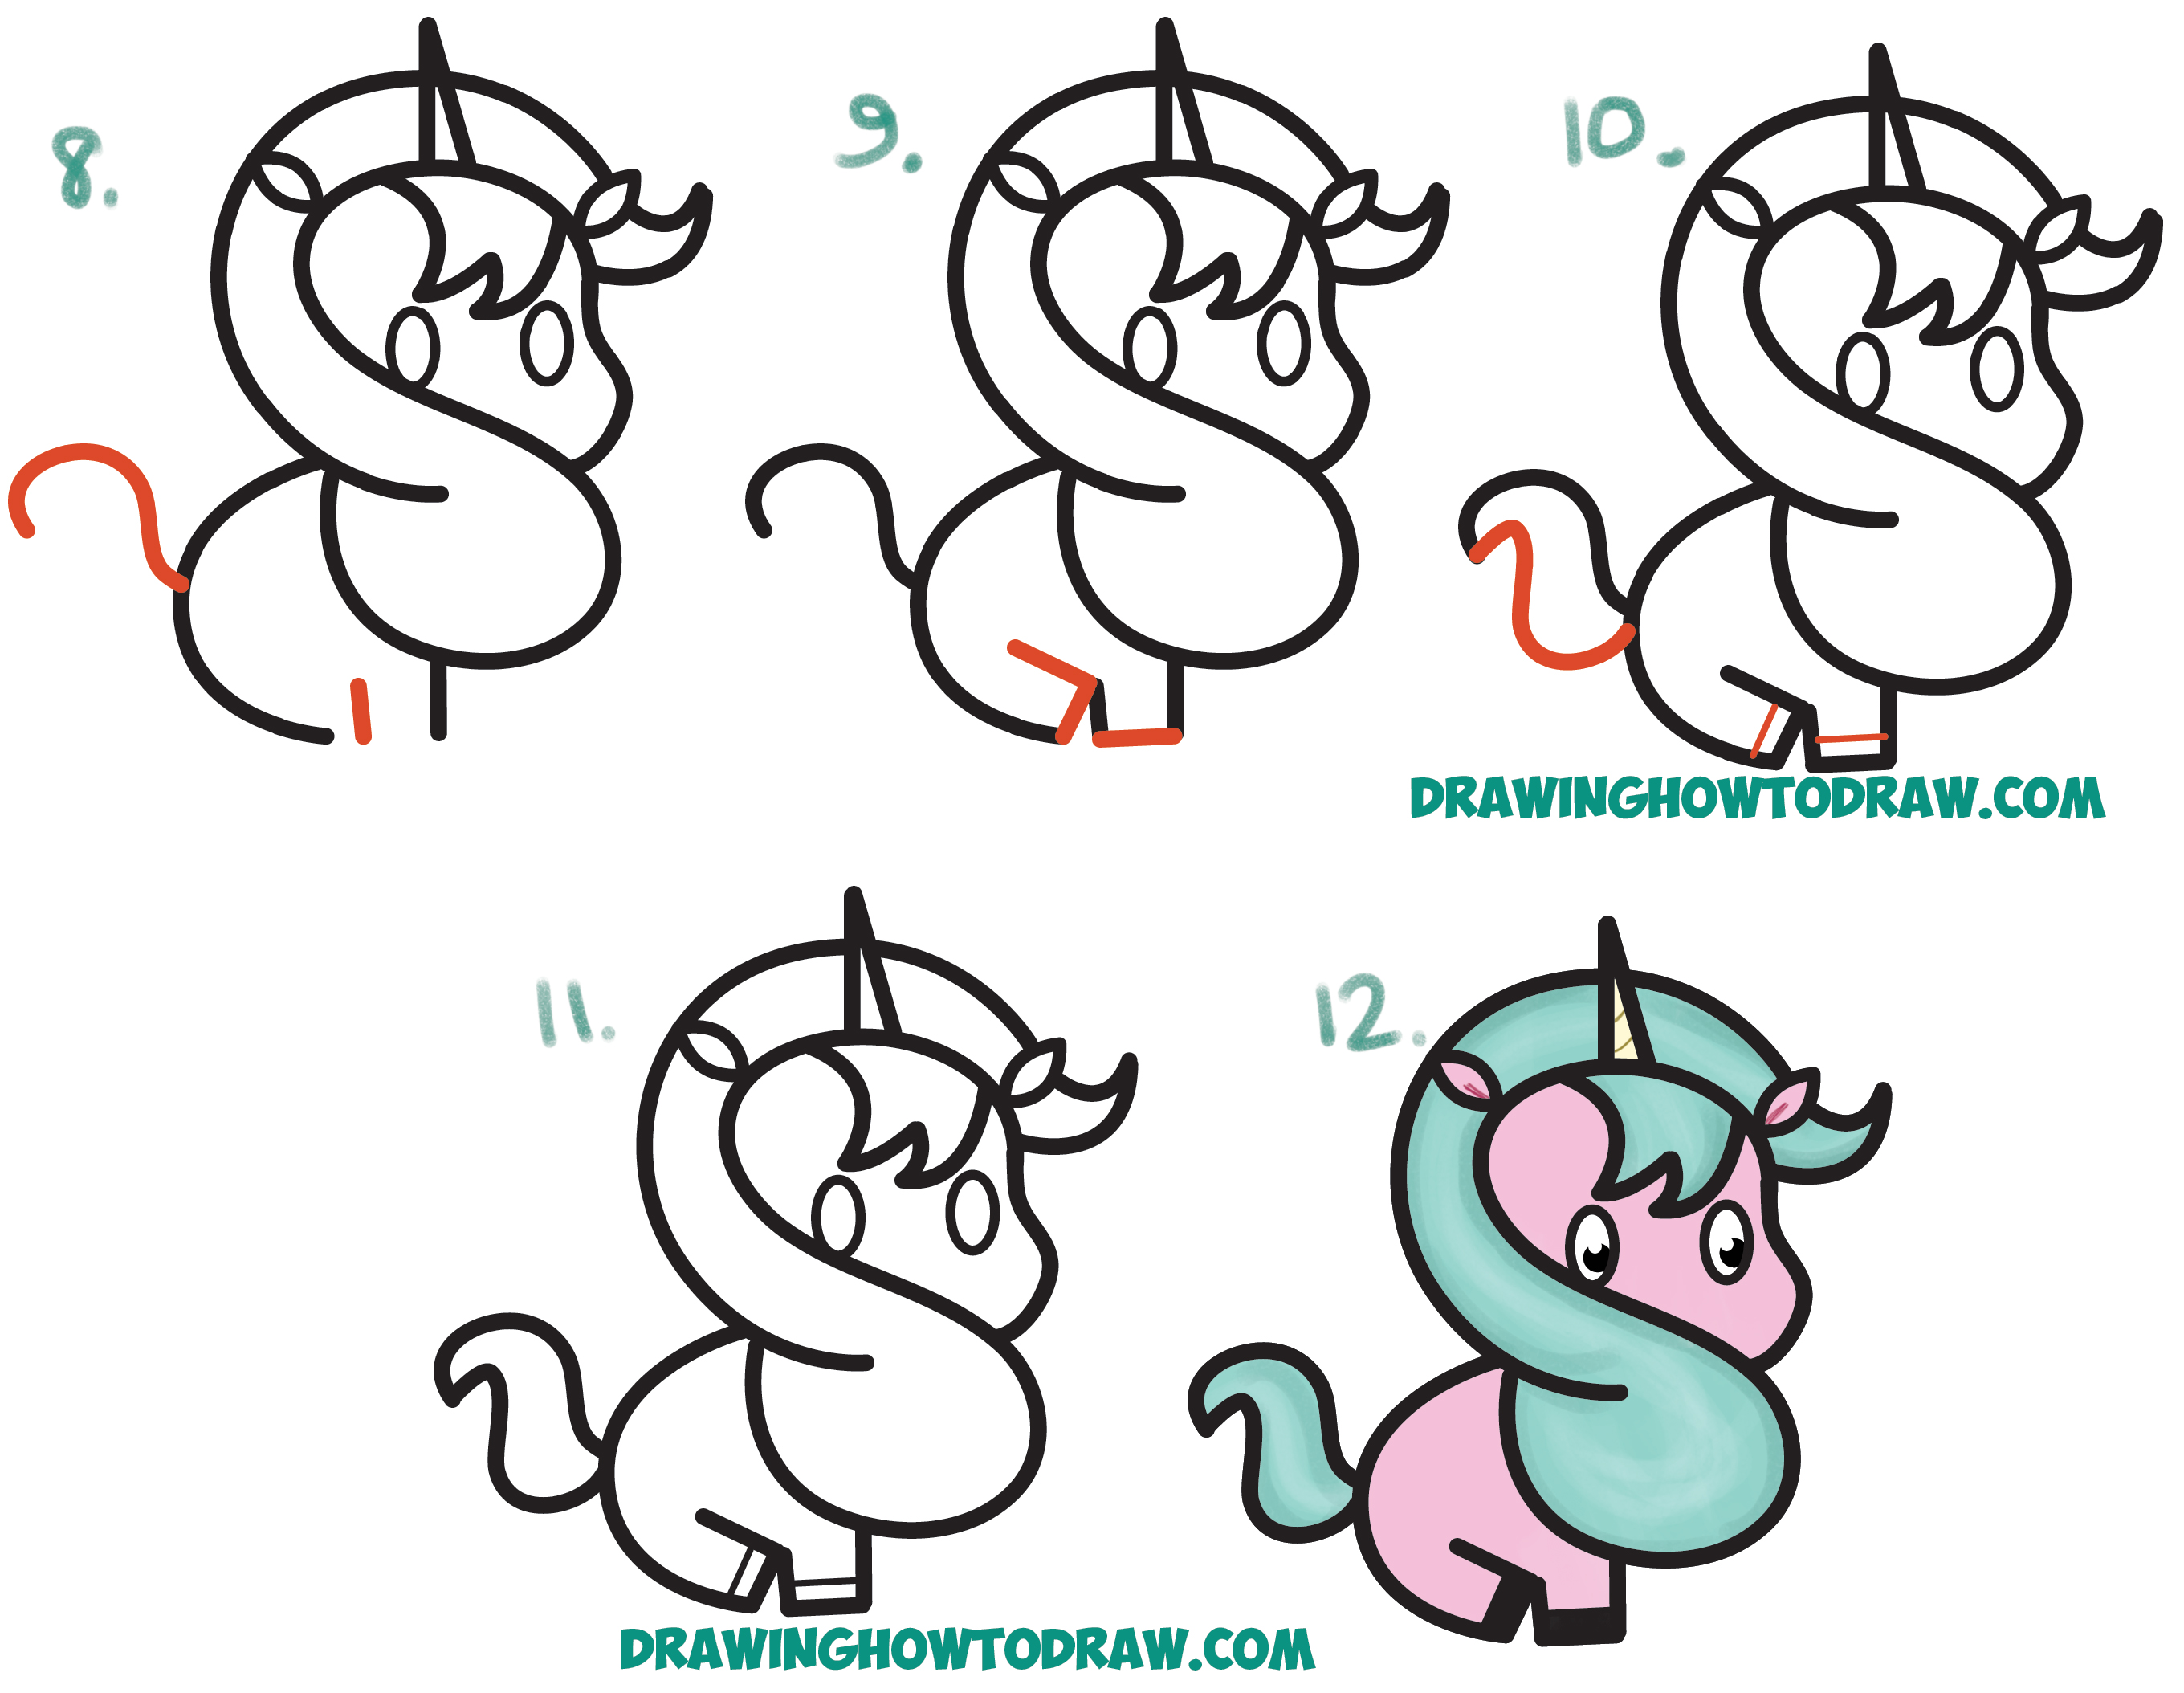 https://www.drawinghowtodraw.com/stepbystepdrawinglessons/wp-content/uploads/2017/05/how-to-draw-cute-kawaii-chibi-cartoon-unicorn-from-dollar-sign-easy-step-by-step-drawing-tutorial-for-children-beginners.jpg